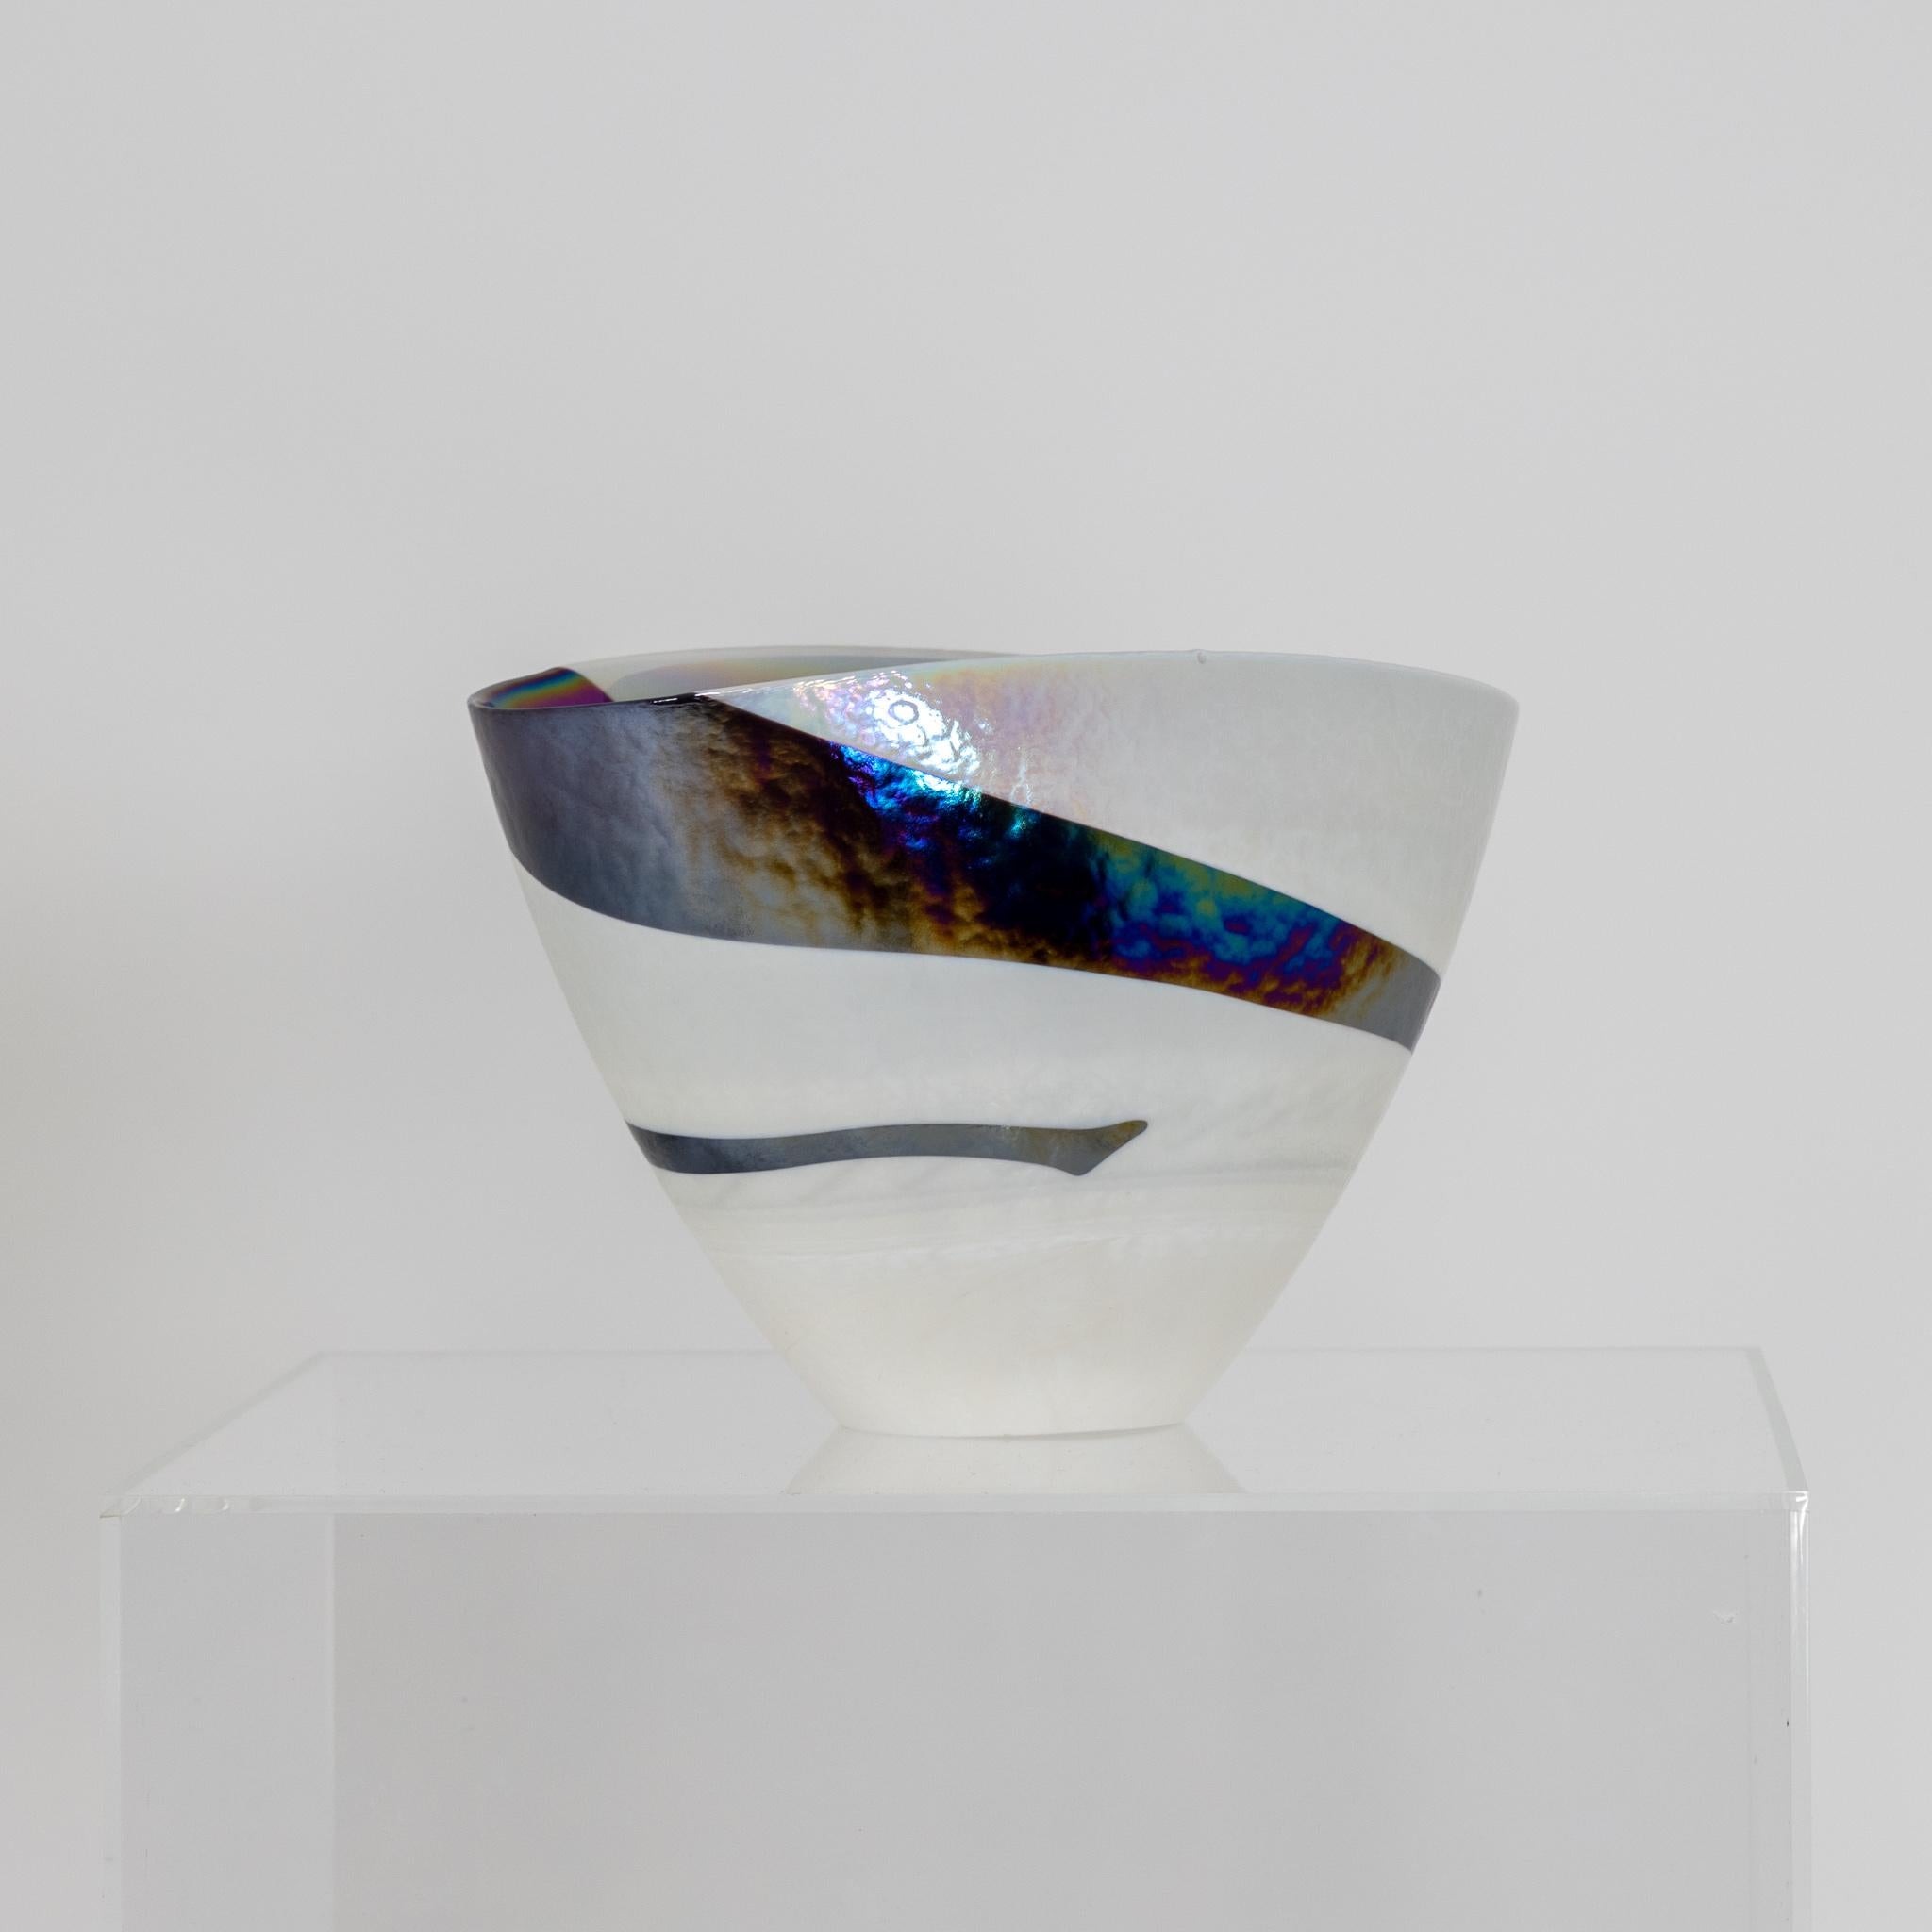 Murano glass vase with smooth wall in conical shape and iridescent dark inclusion. Label on the inside.